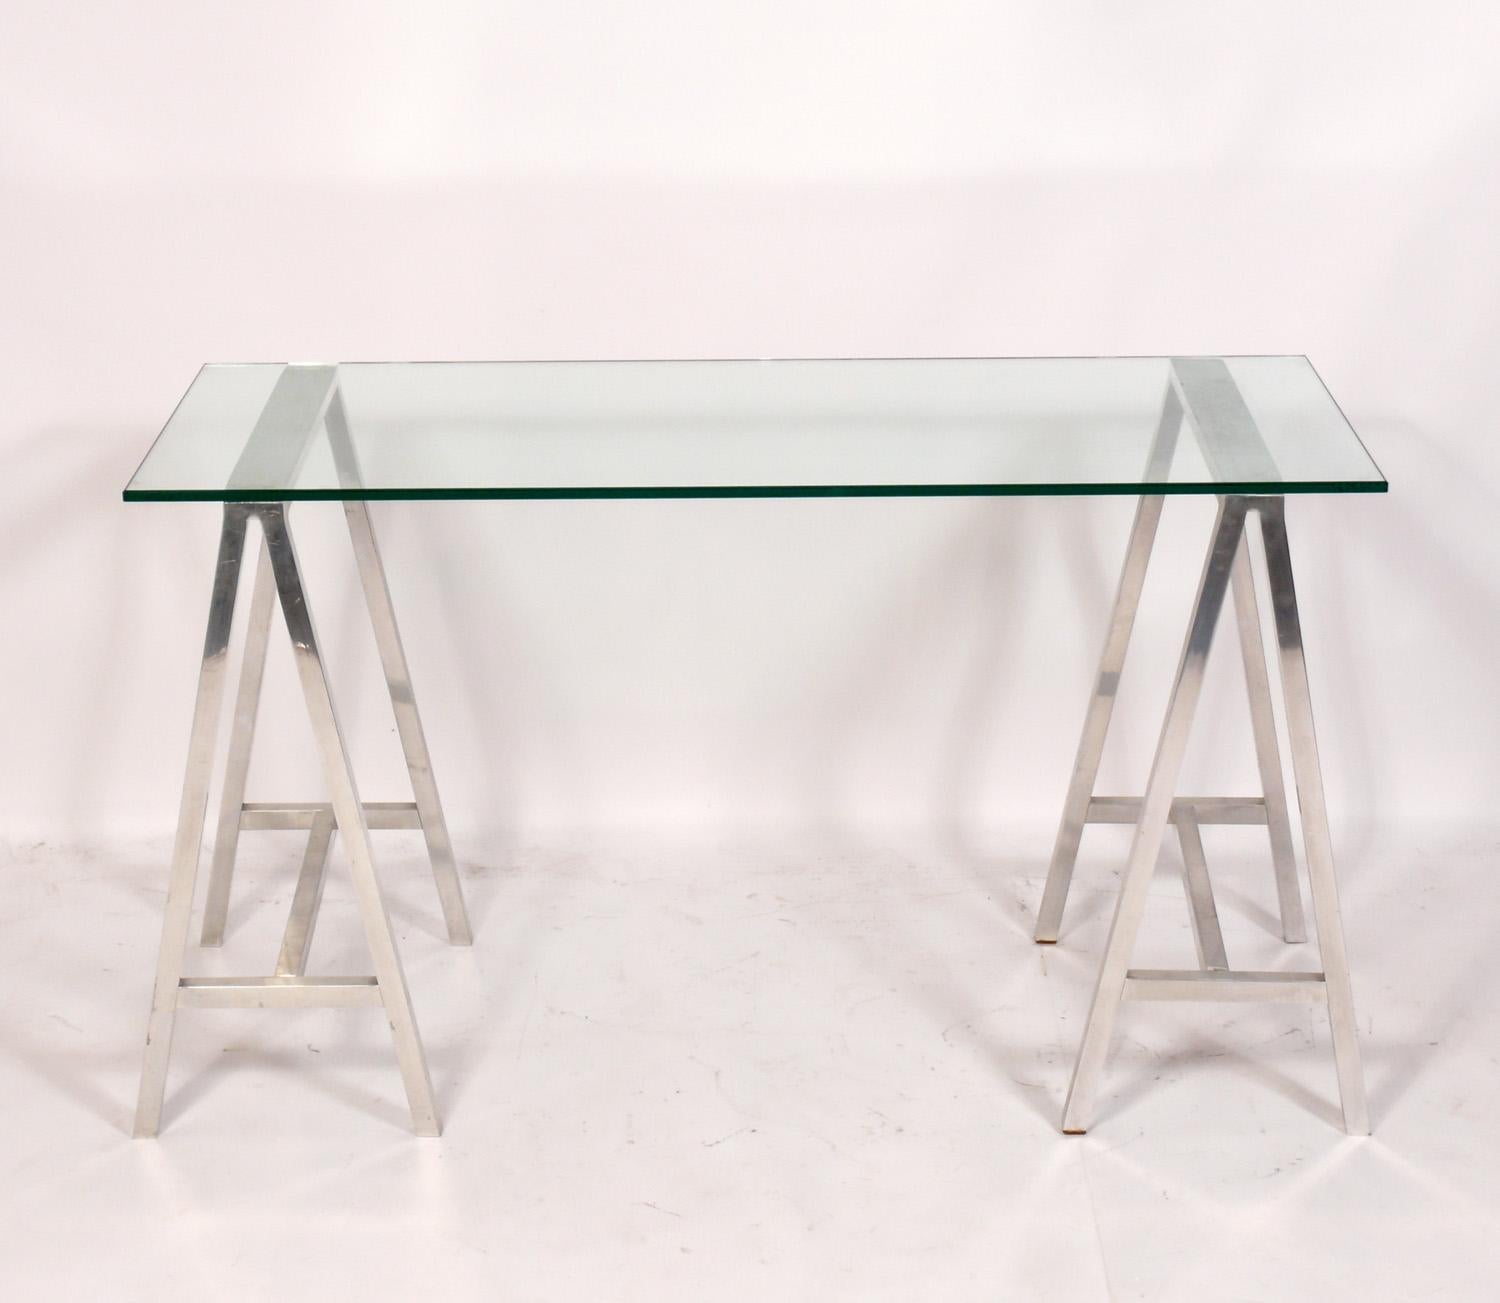 Modernist aluminum and glass console table or desk, American, circa 1960s. This piece is a versatile size and can be used as a console table, desk, vanity, bar, or media table.